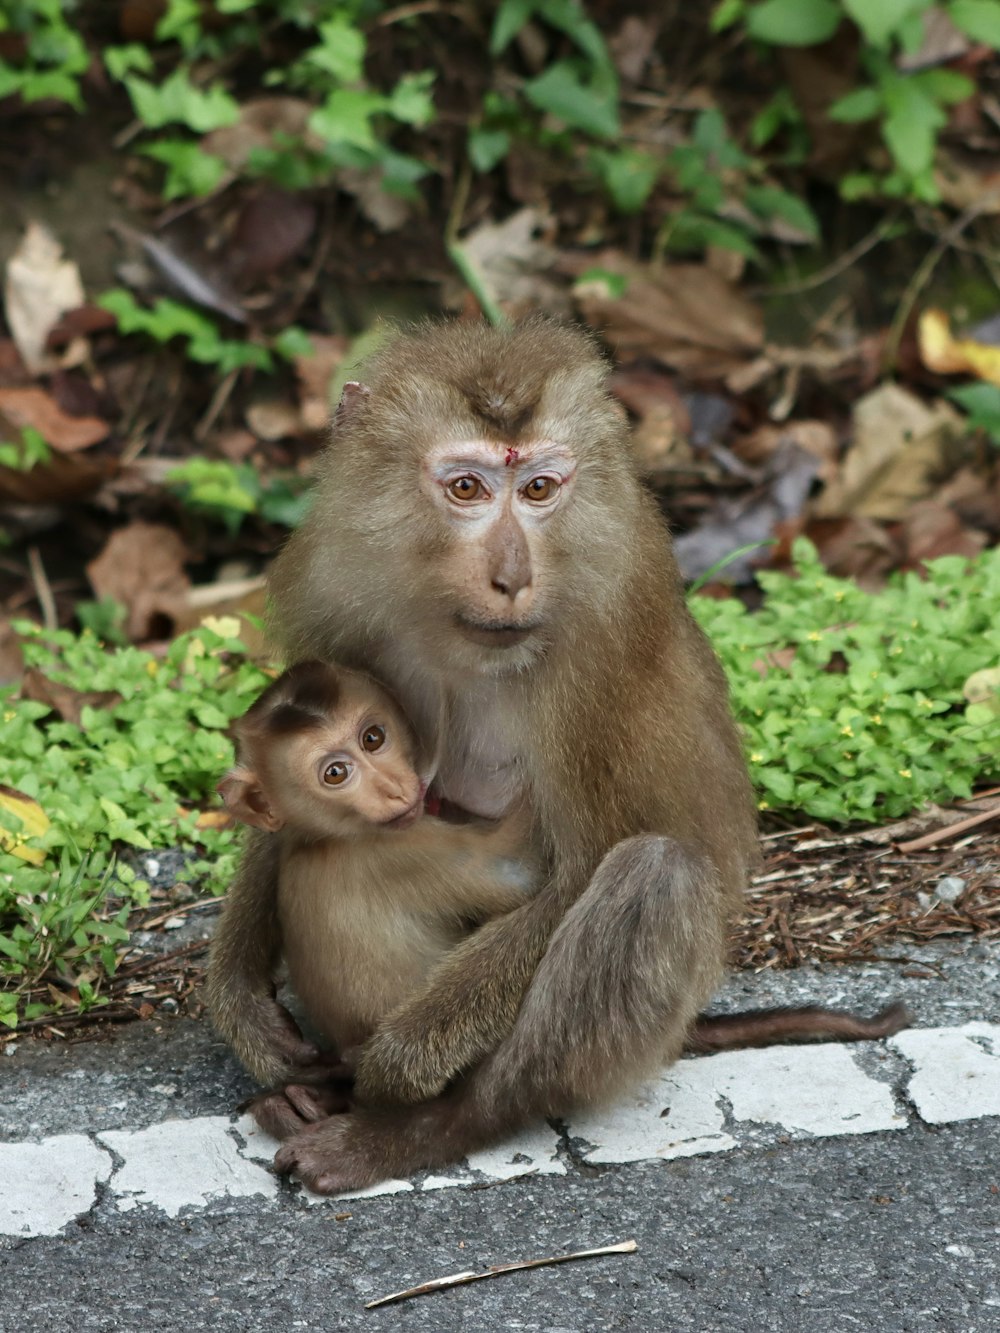 a monkey and a baby sitting on the ground